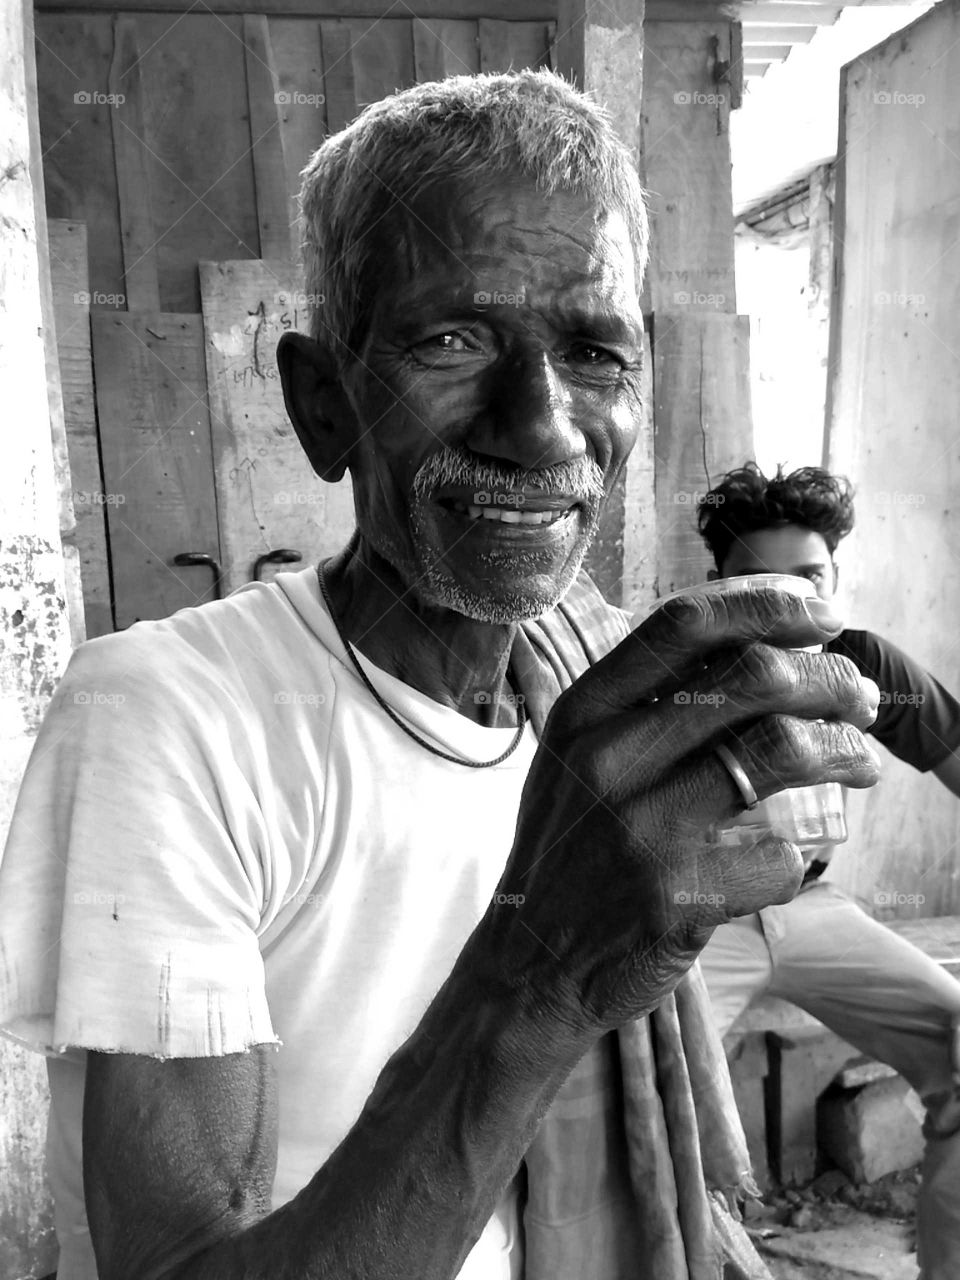 Happiness is everything for a better life. This man is happy with his condition, then what else he need, nothing!